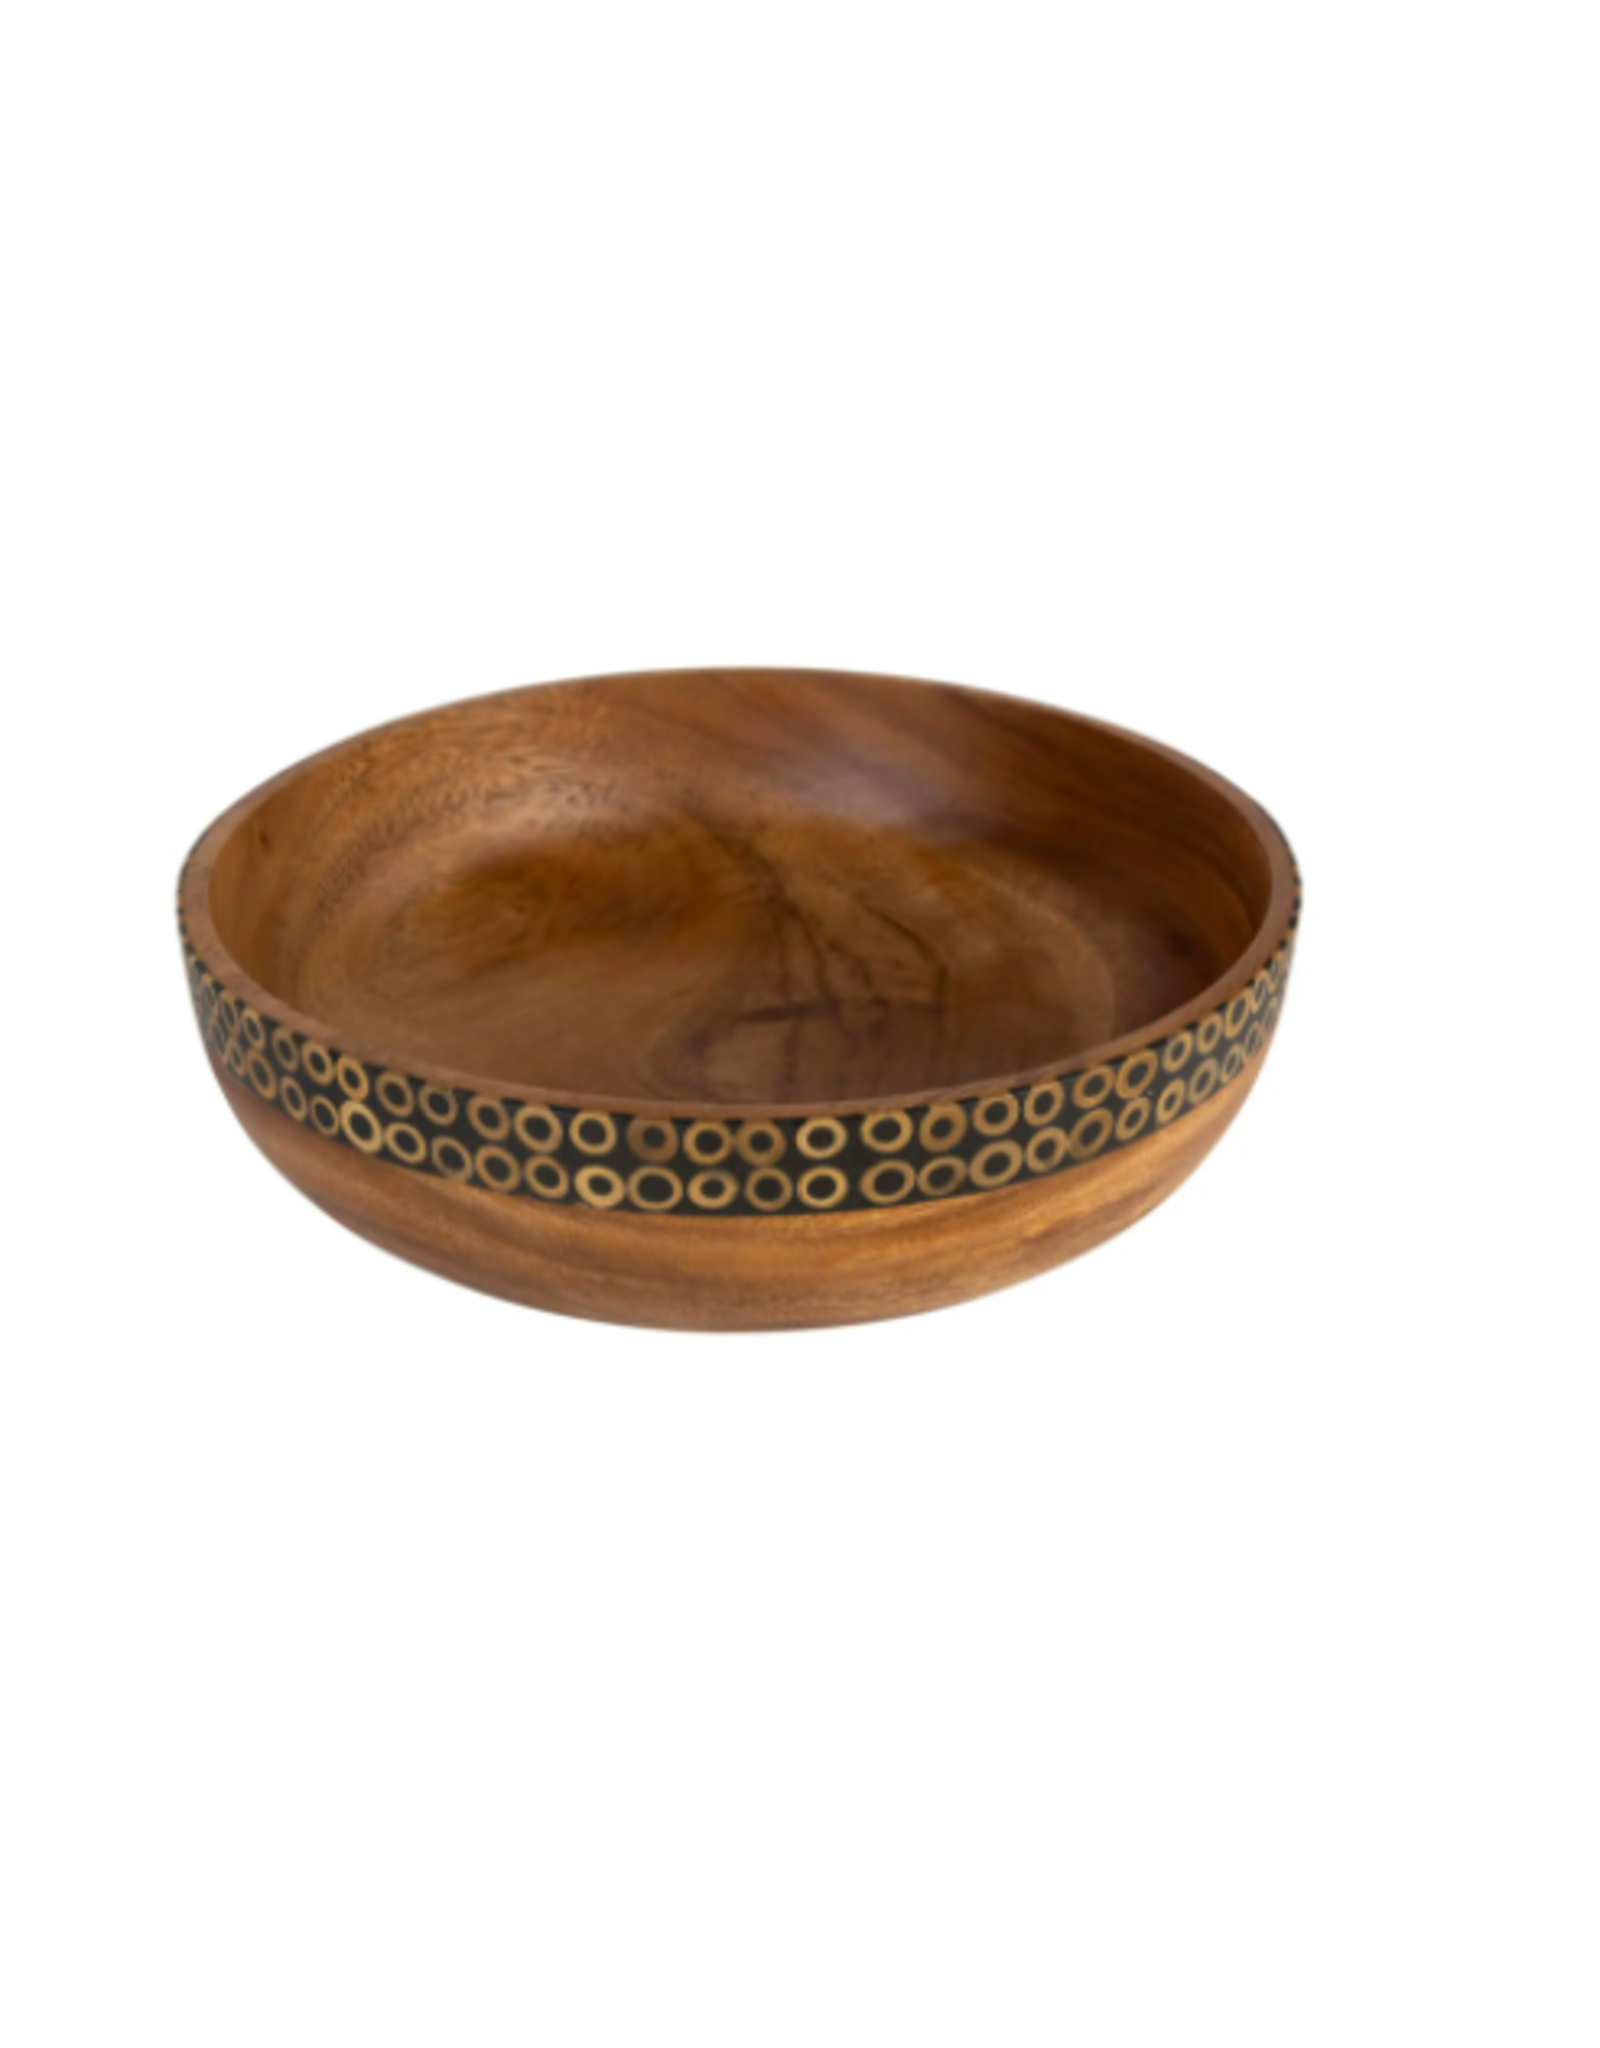 Trade roots Bamboo Inlaid Round Wood Serving Bowl, Indonesia